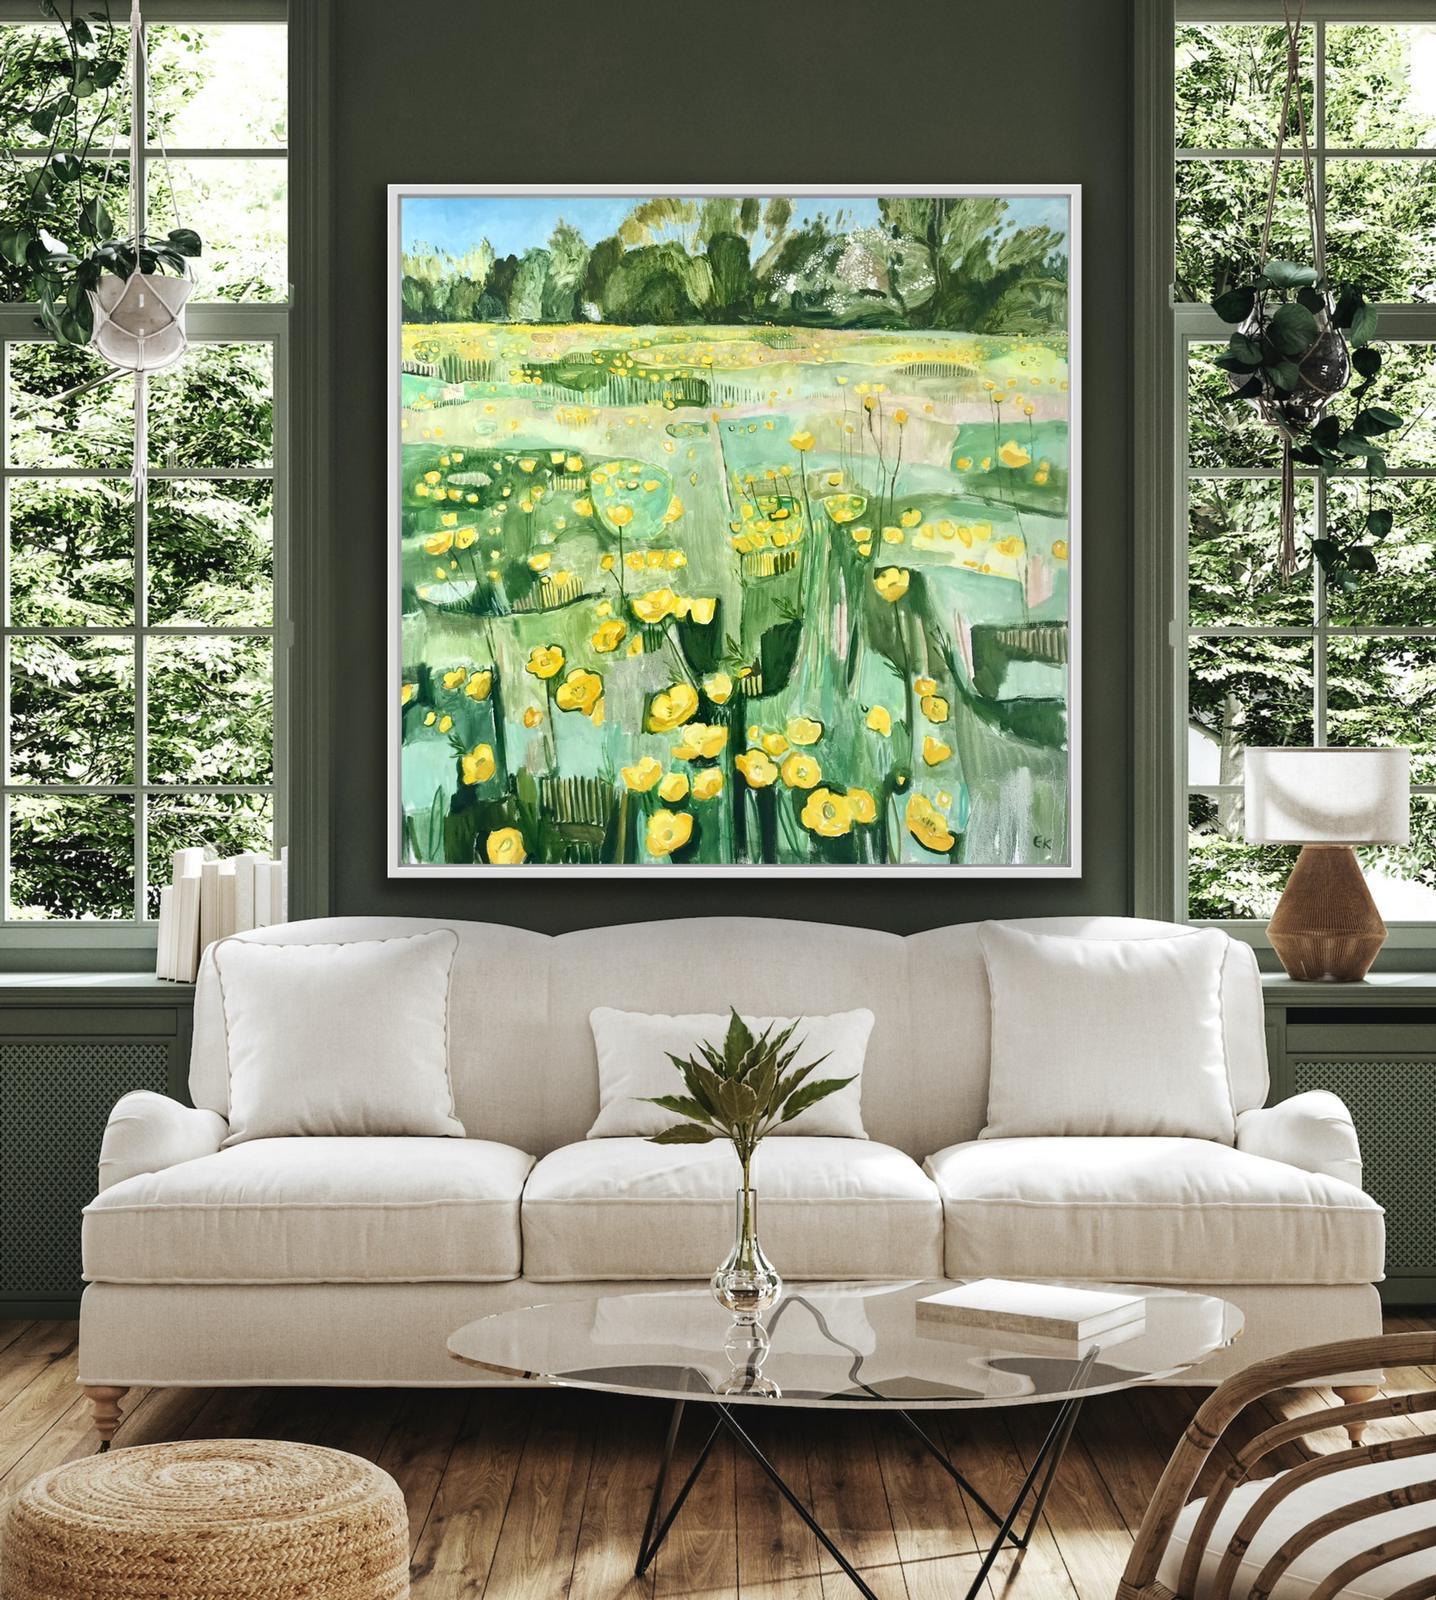 Just Buttercups by Elaine , Original art, Contemporary abstract art, Painting 2